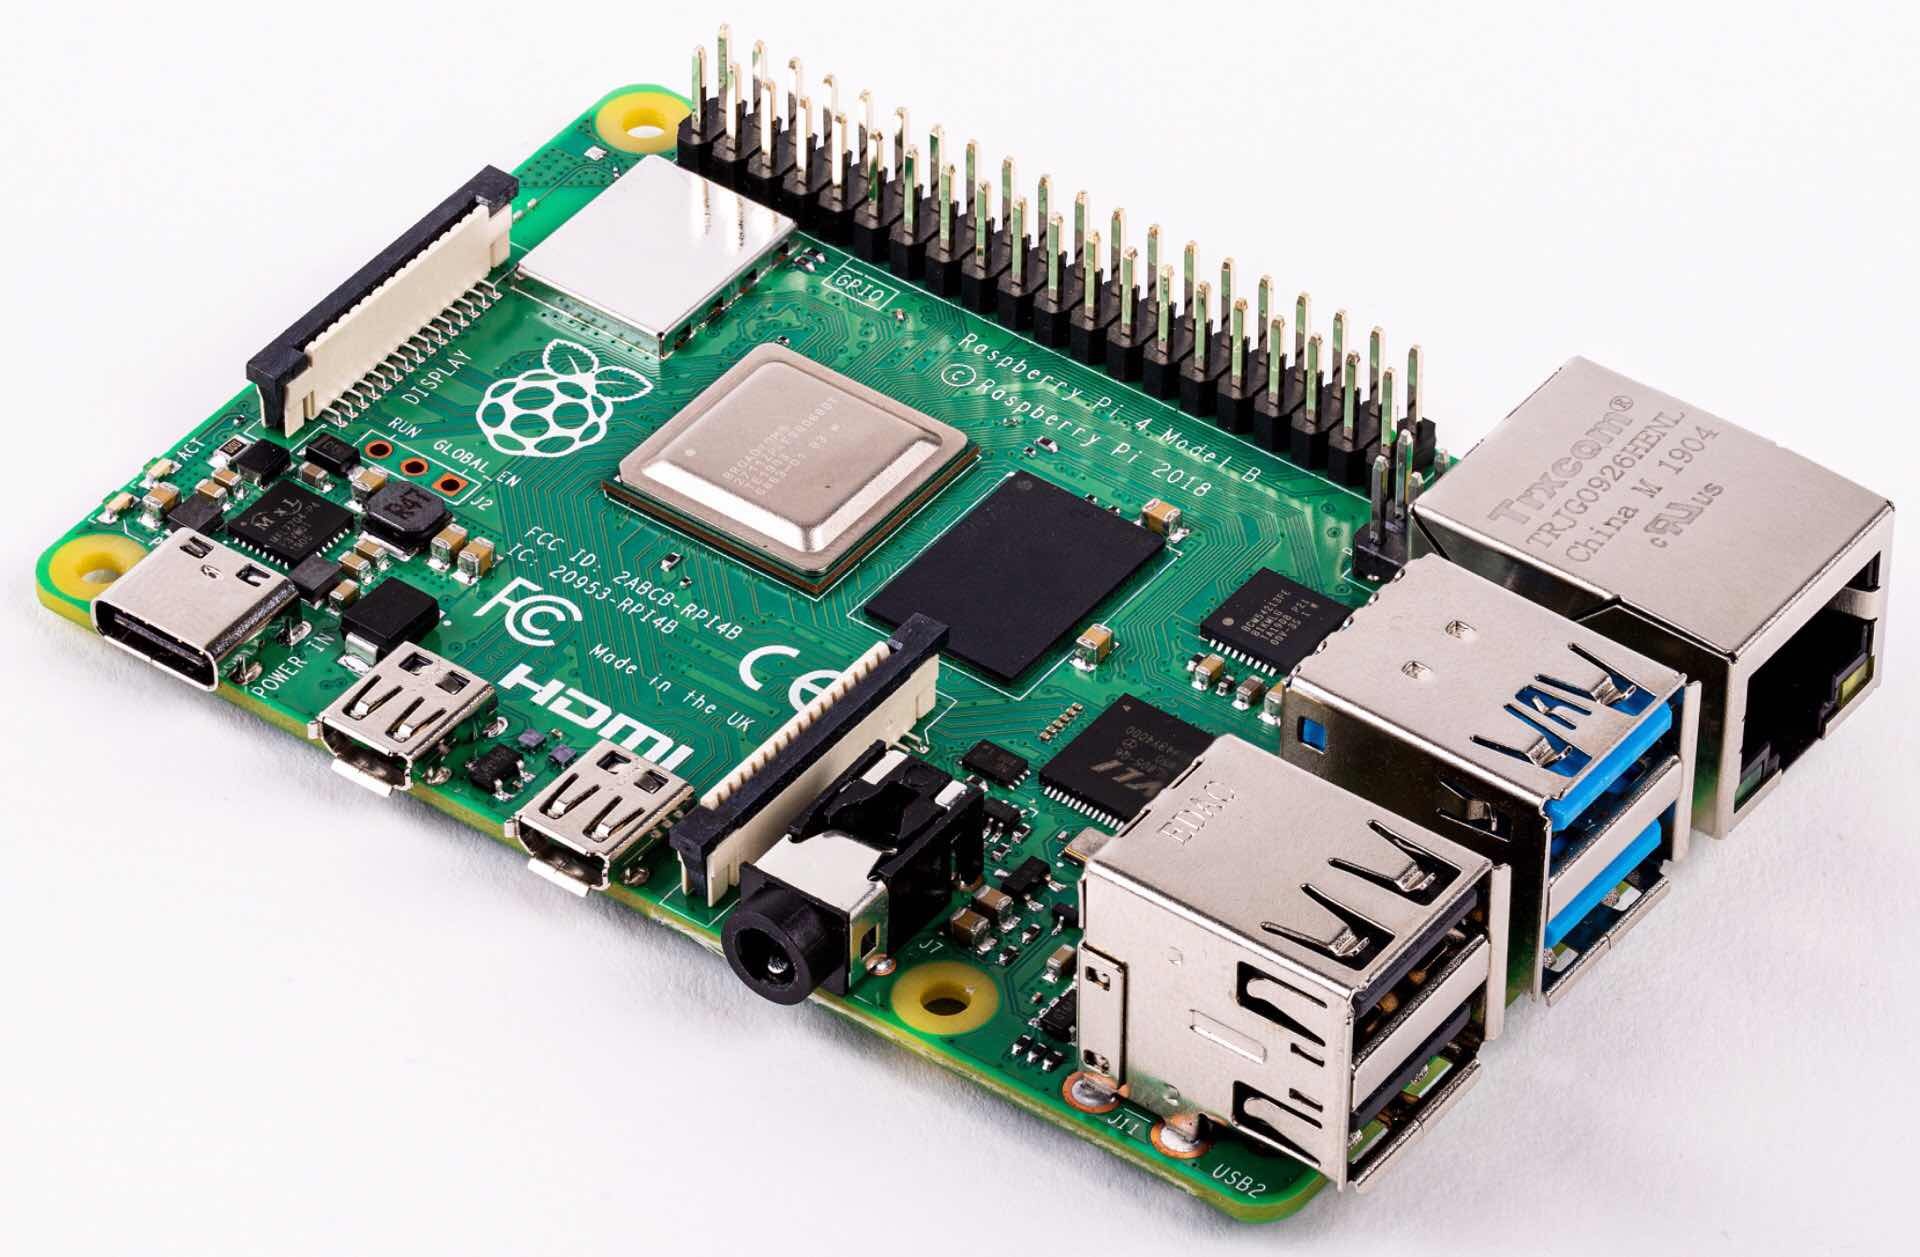 The Raspberry Pi 4 mini-computer. ($53 for 1GB RAM, $63 for 2GB RAM, and $73 for 4GB RAM)